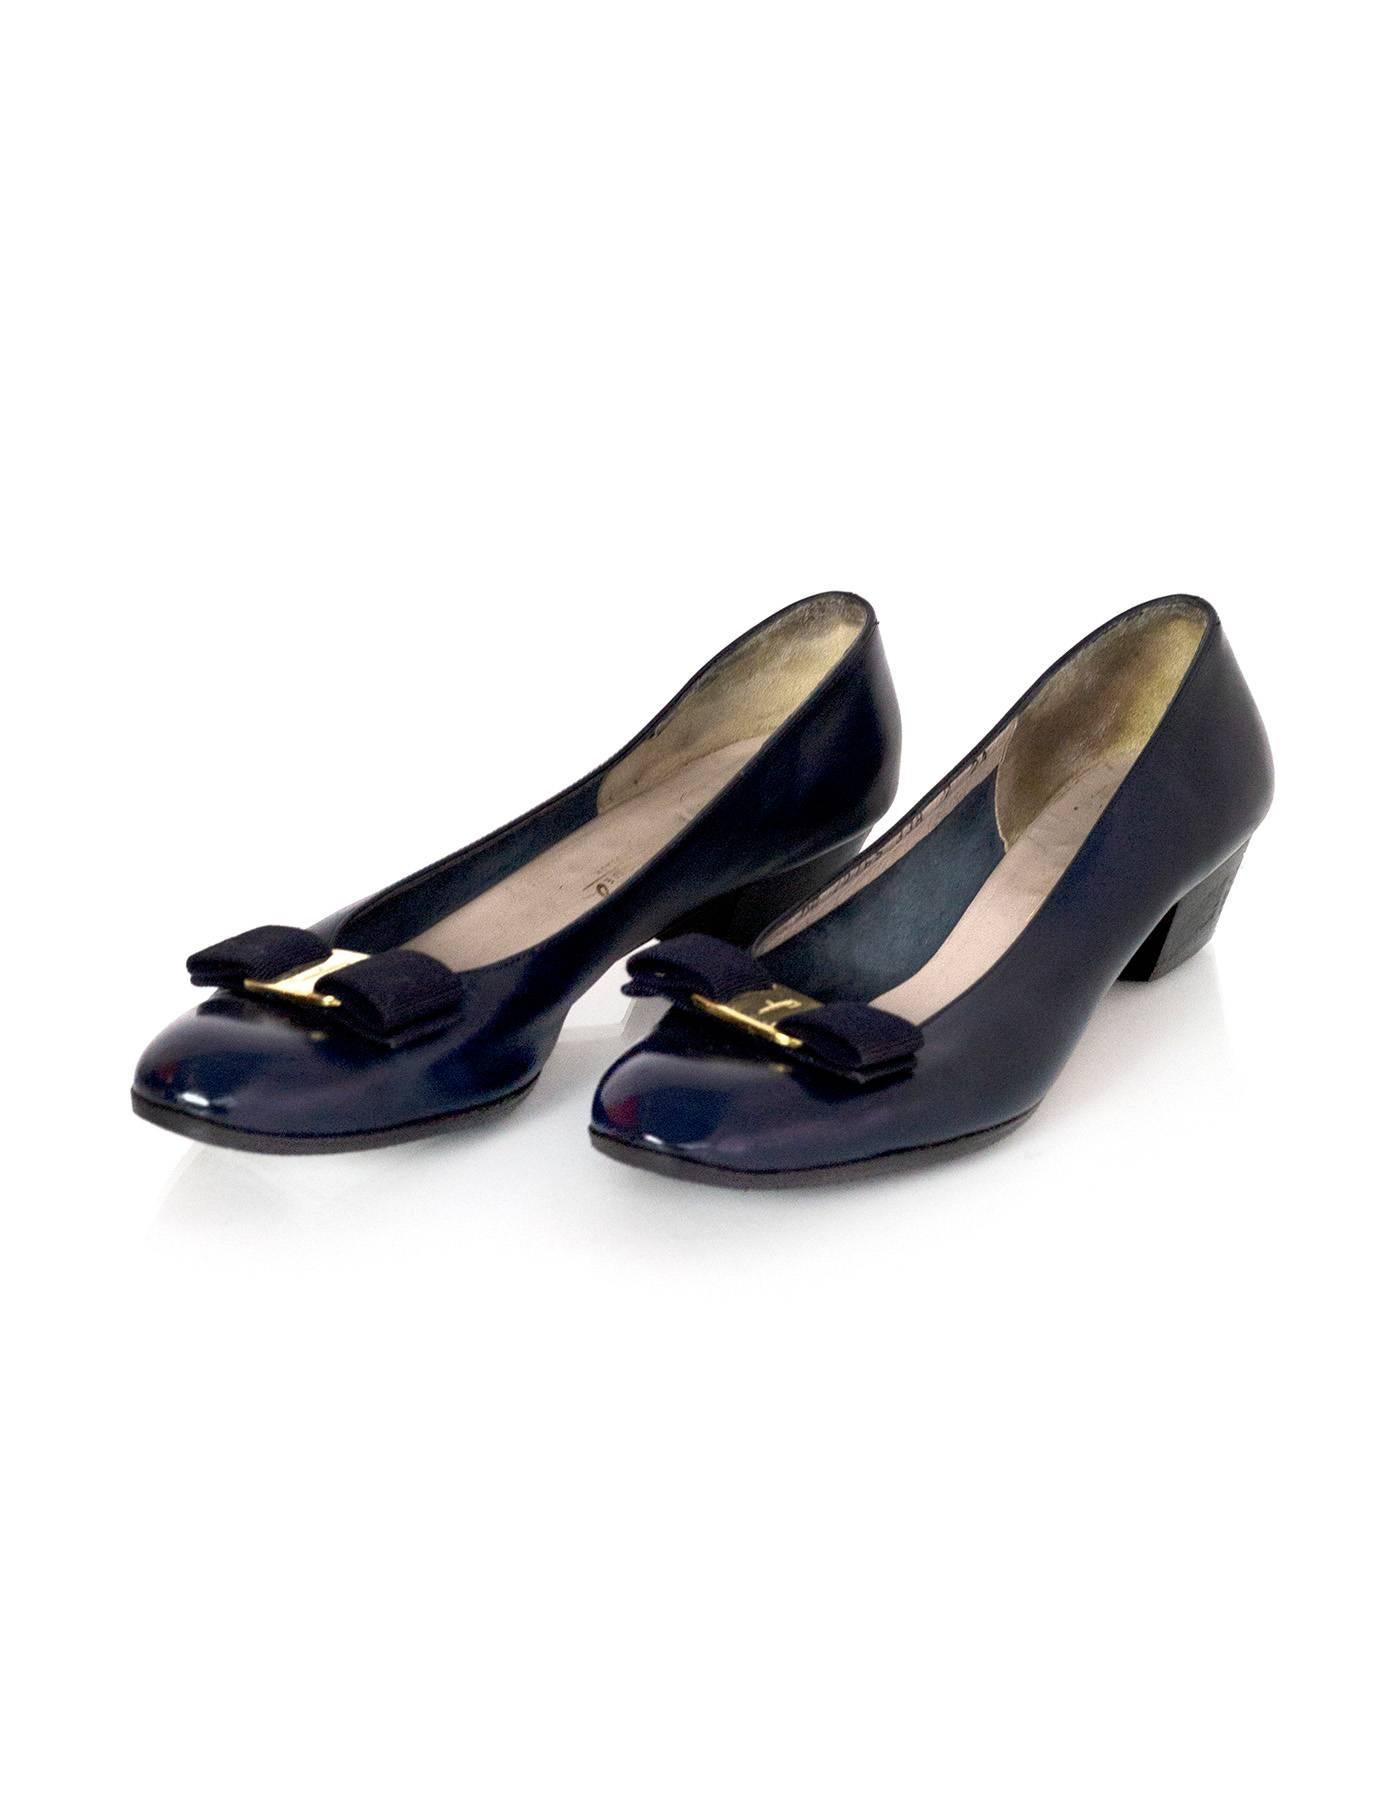 Salvatore Ferragamo Navy Leather Kitten Heels 
Features navy grosgrain and goldtone bow at toe cap

Made In: Italy
Color: Navy
Materials: Leather
Closure/Opening: Slip on
Sole Stamp: Made in Italy
Lining Stamp: DR 22765 338 7 2A
Overall Condition: